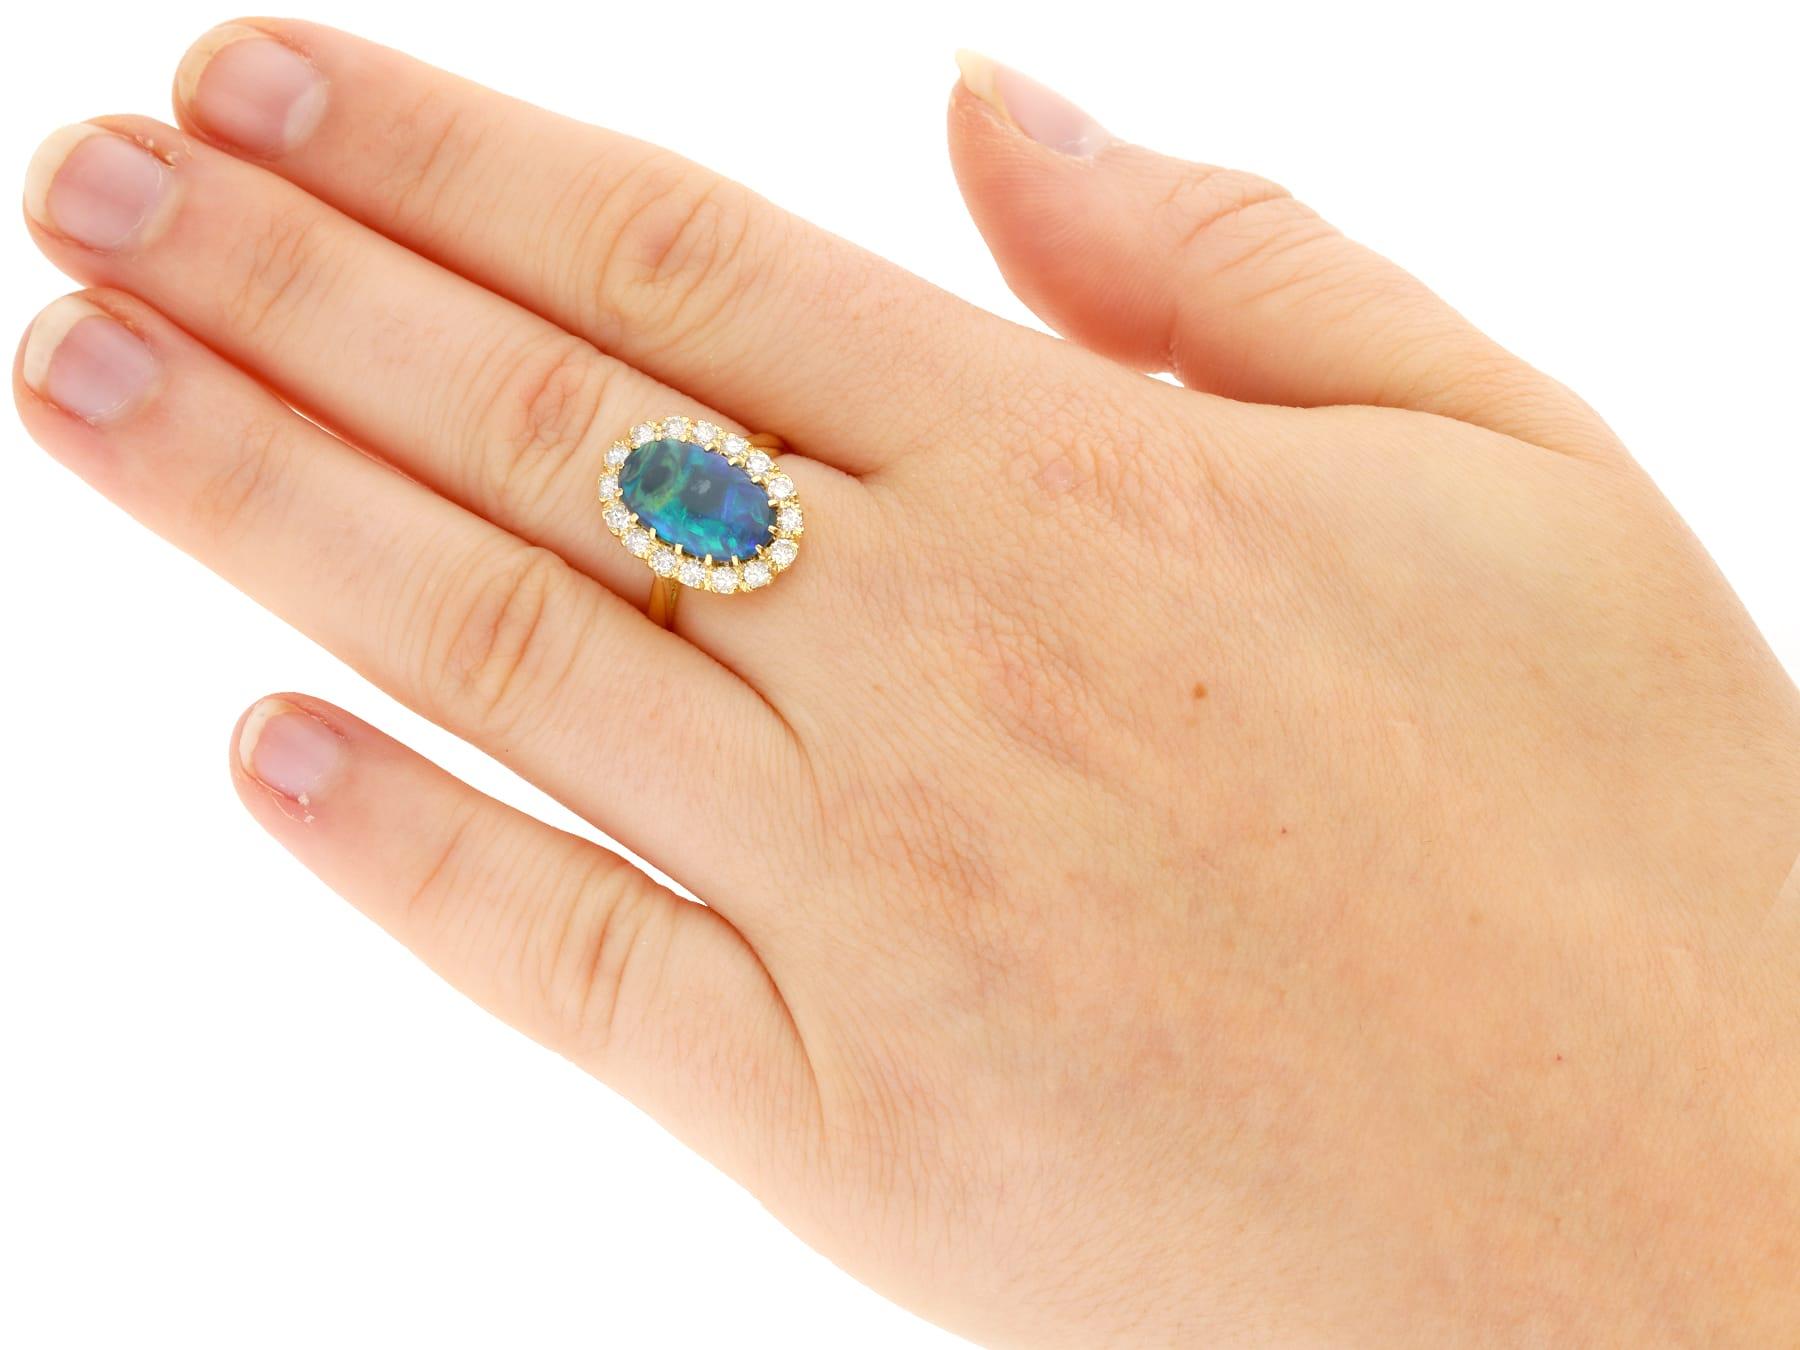 Vintage 2.02 Carat Black Opal and Diamond Ring 18k Yellow Gold In Excellent Condition For Sale In Jesmond, Newcastle Upon Tyne